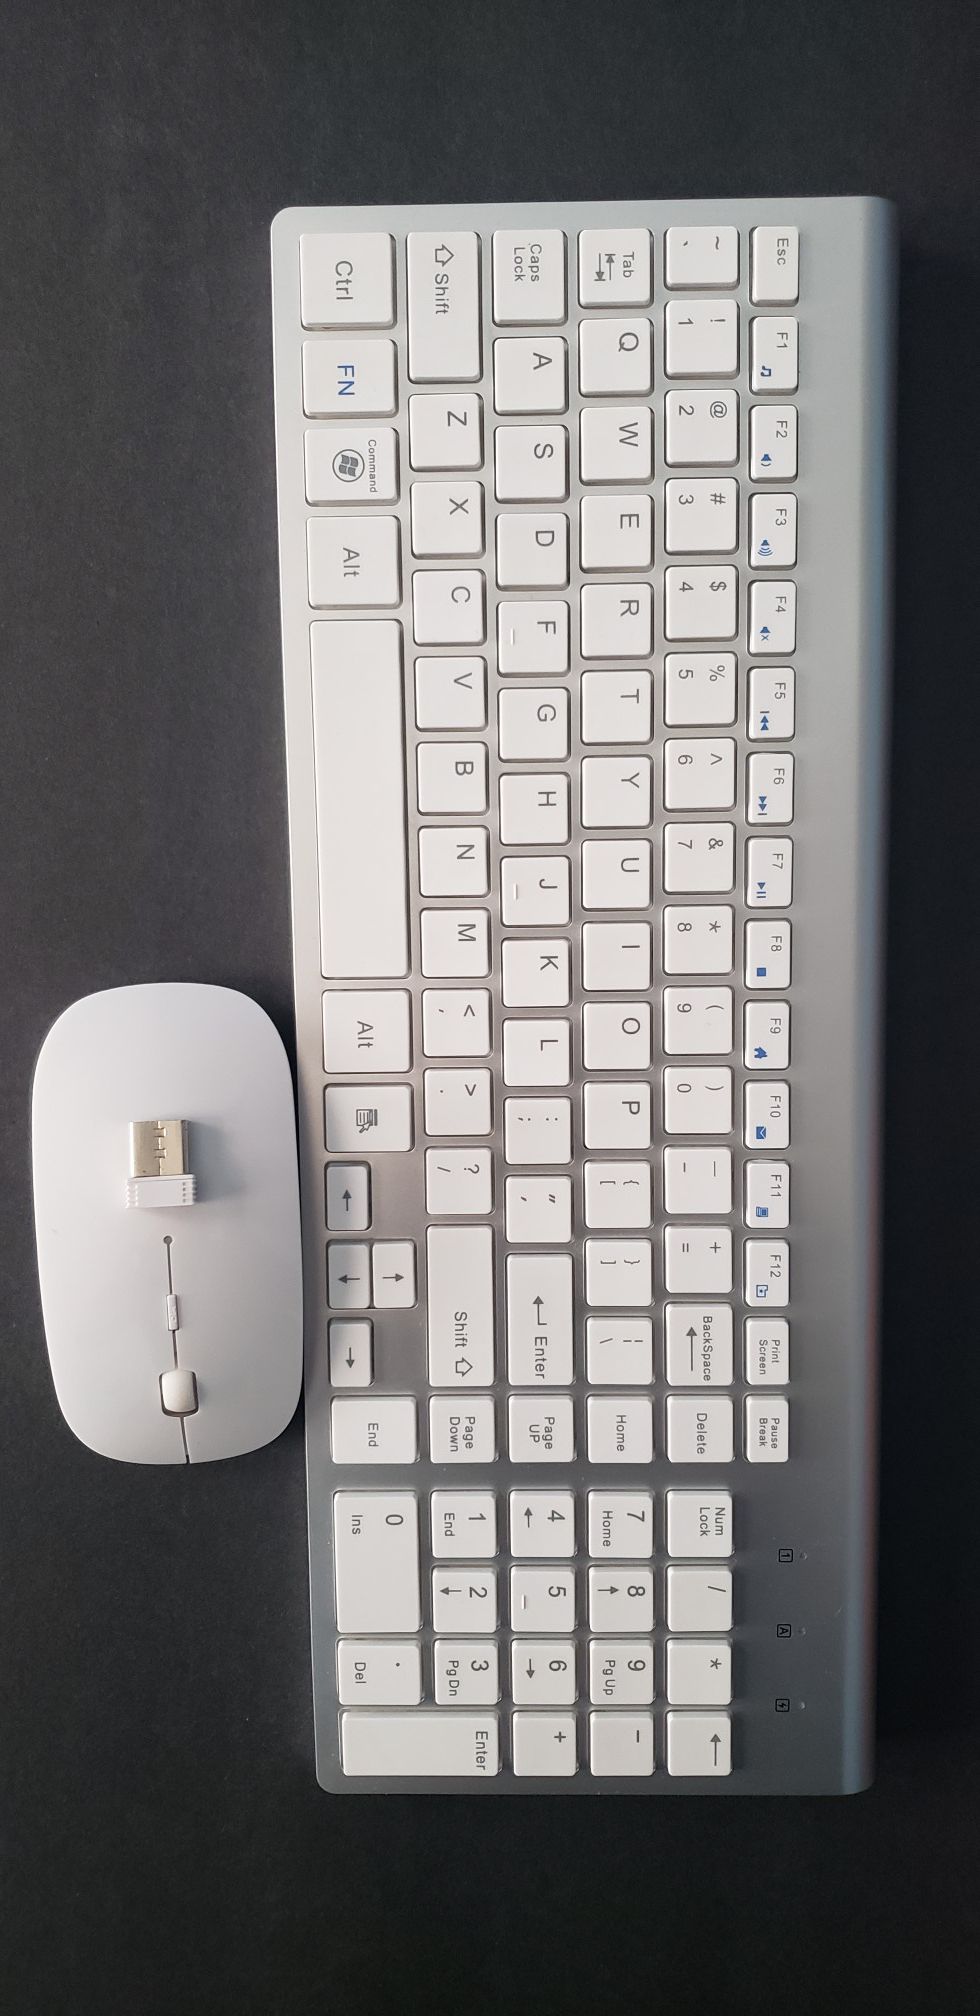 USB Wireless Keyboard and Mouse.